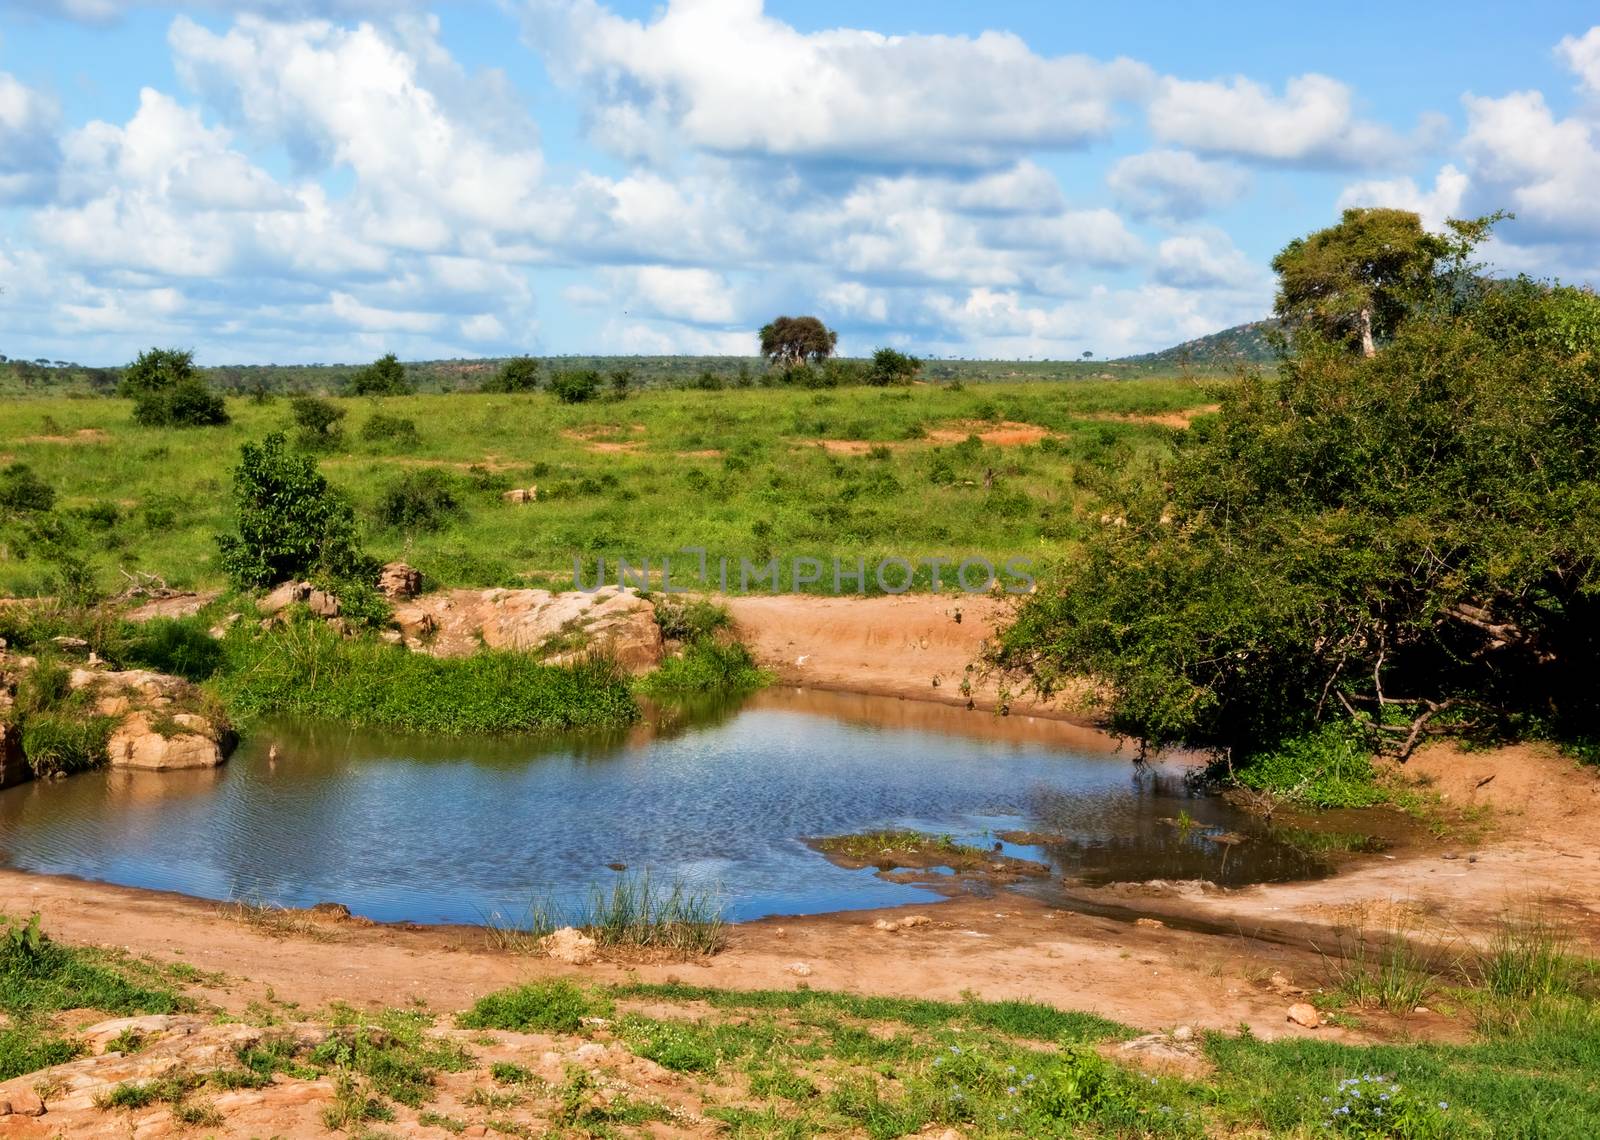 Pond of clear water in bush on savanna in Africa. Tsavo West, Kenya, Africa by photocreo